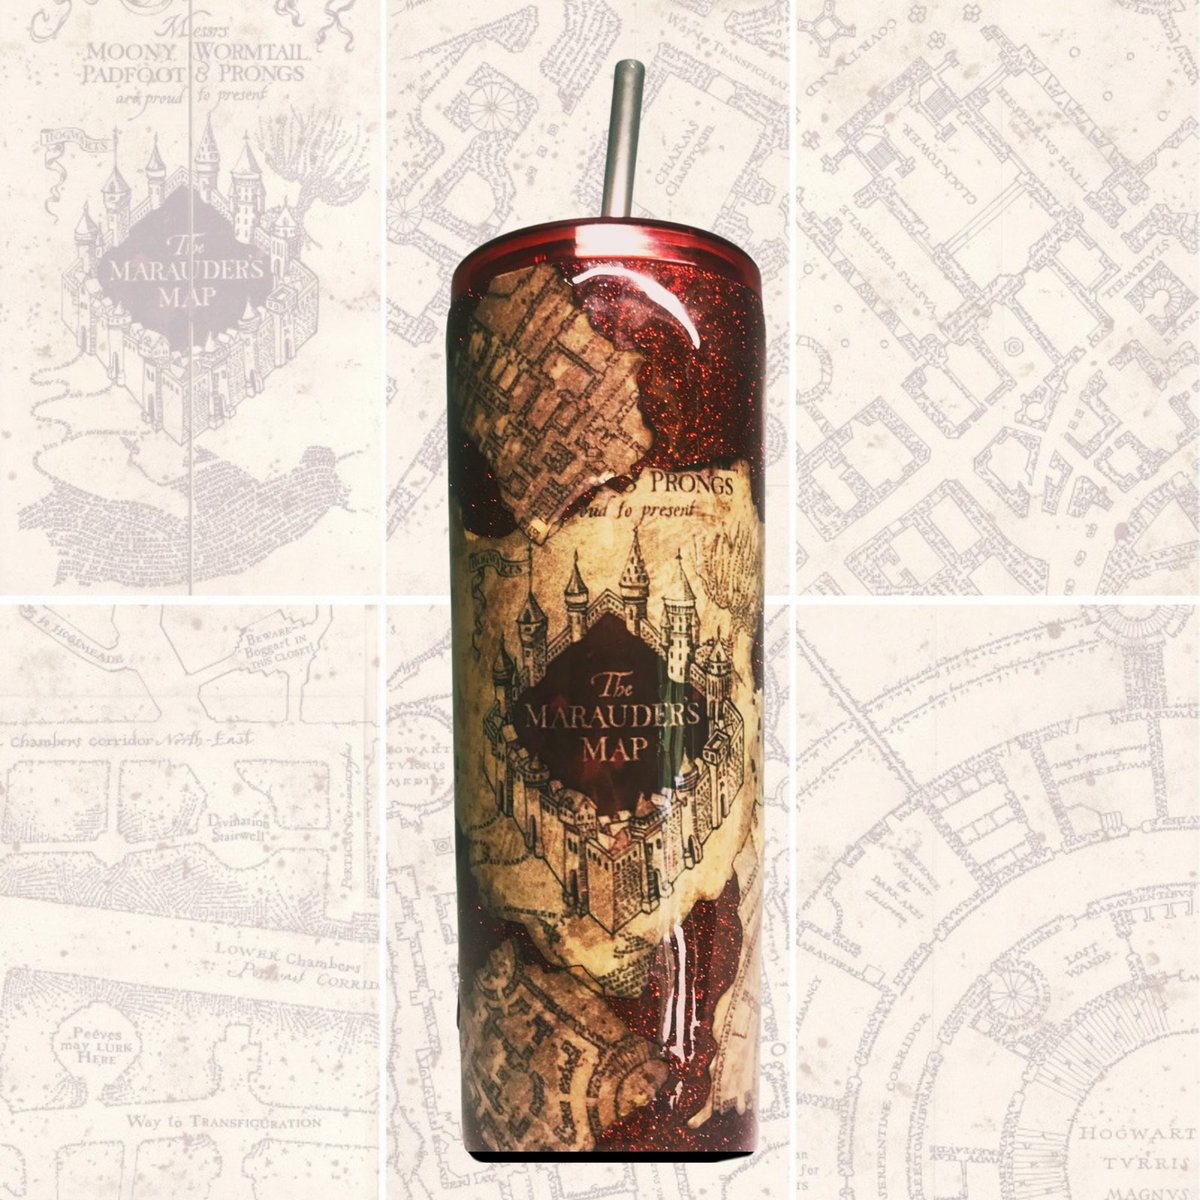 Very excited to bring back the Marauder's Map tumbler to my shop :-D #crafts #harrypotter #maraudersmap #isolemnlyswear